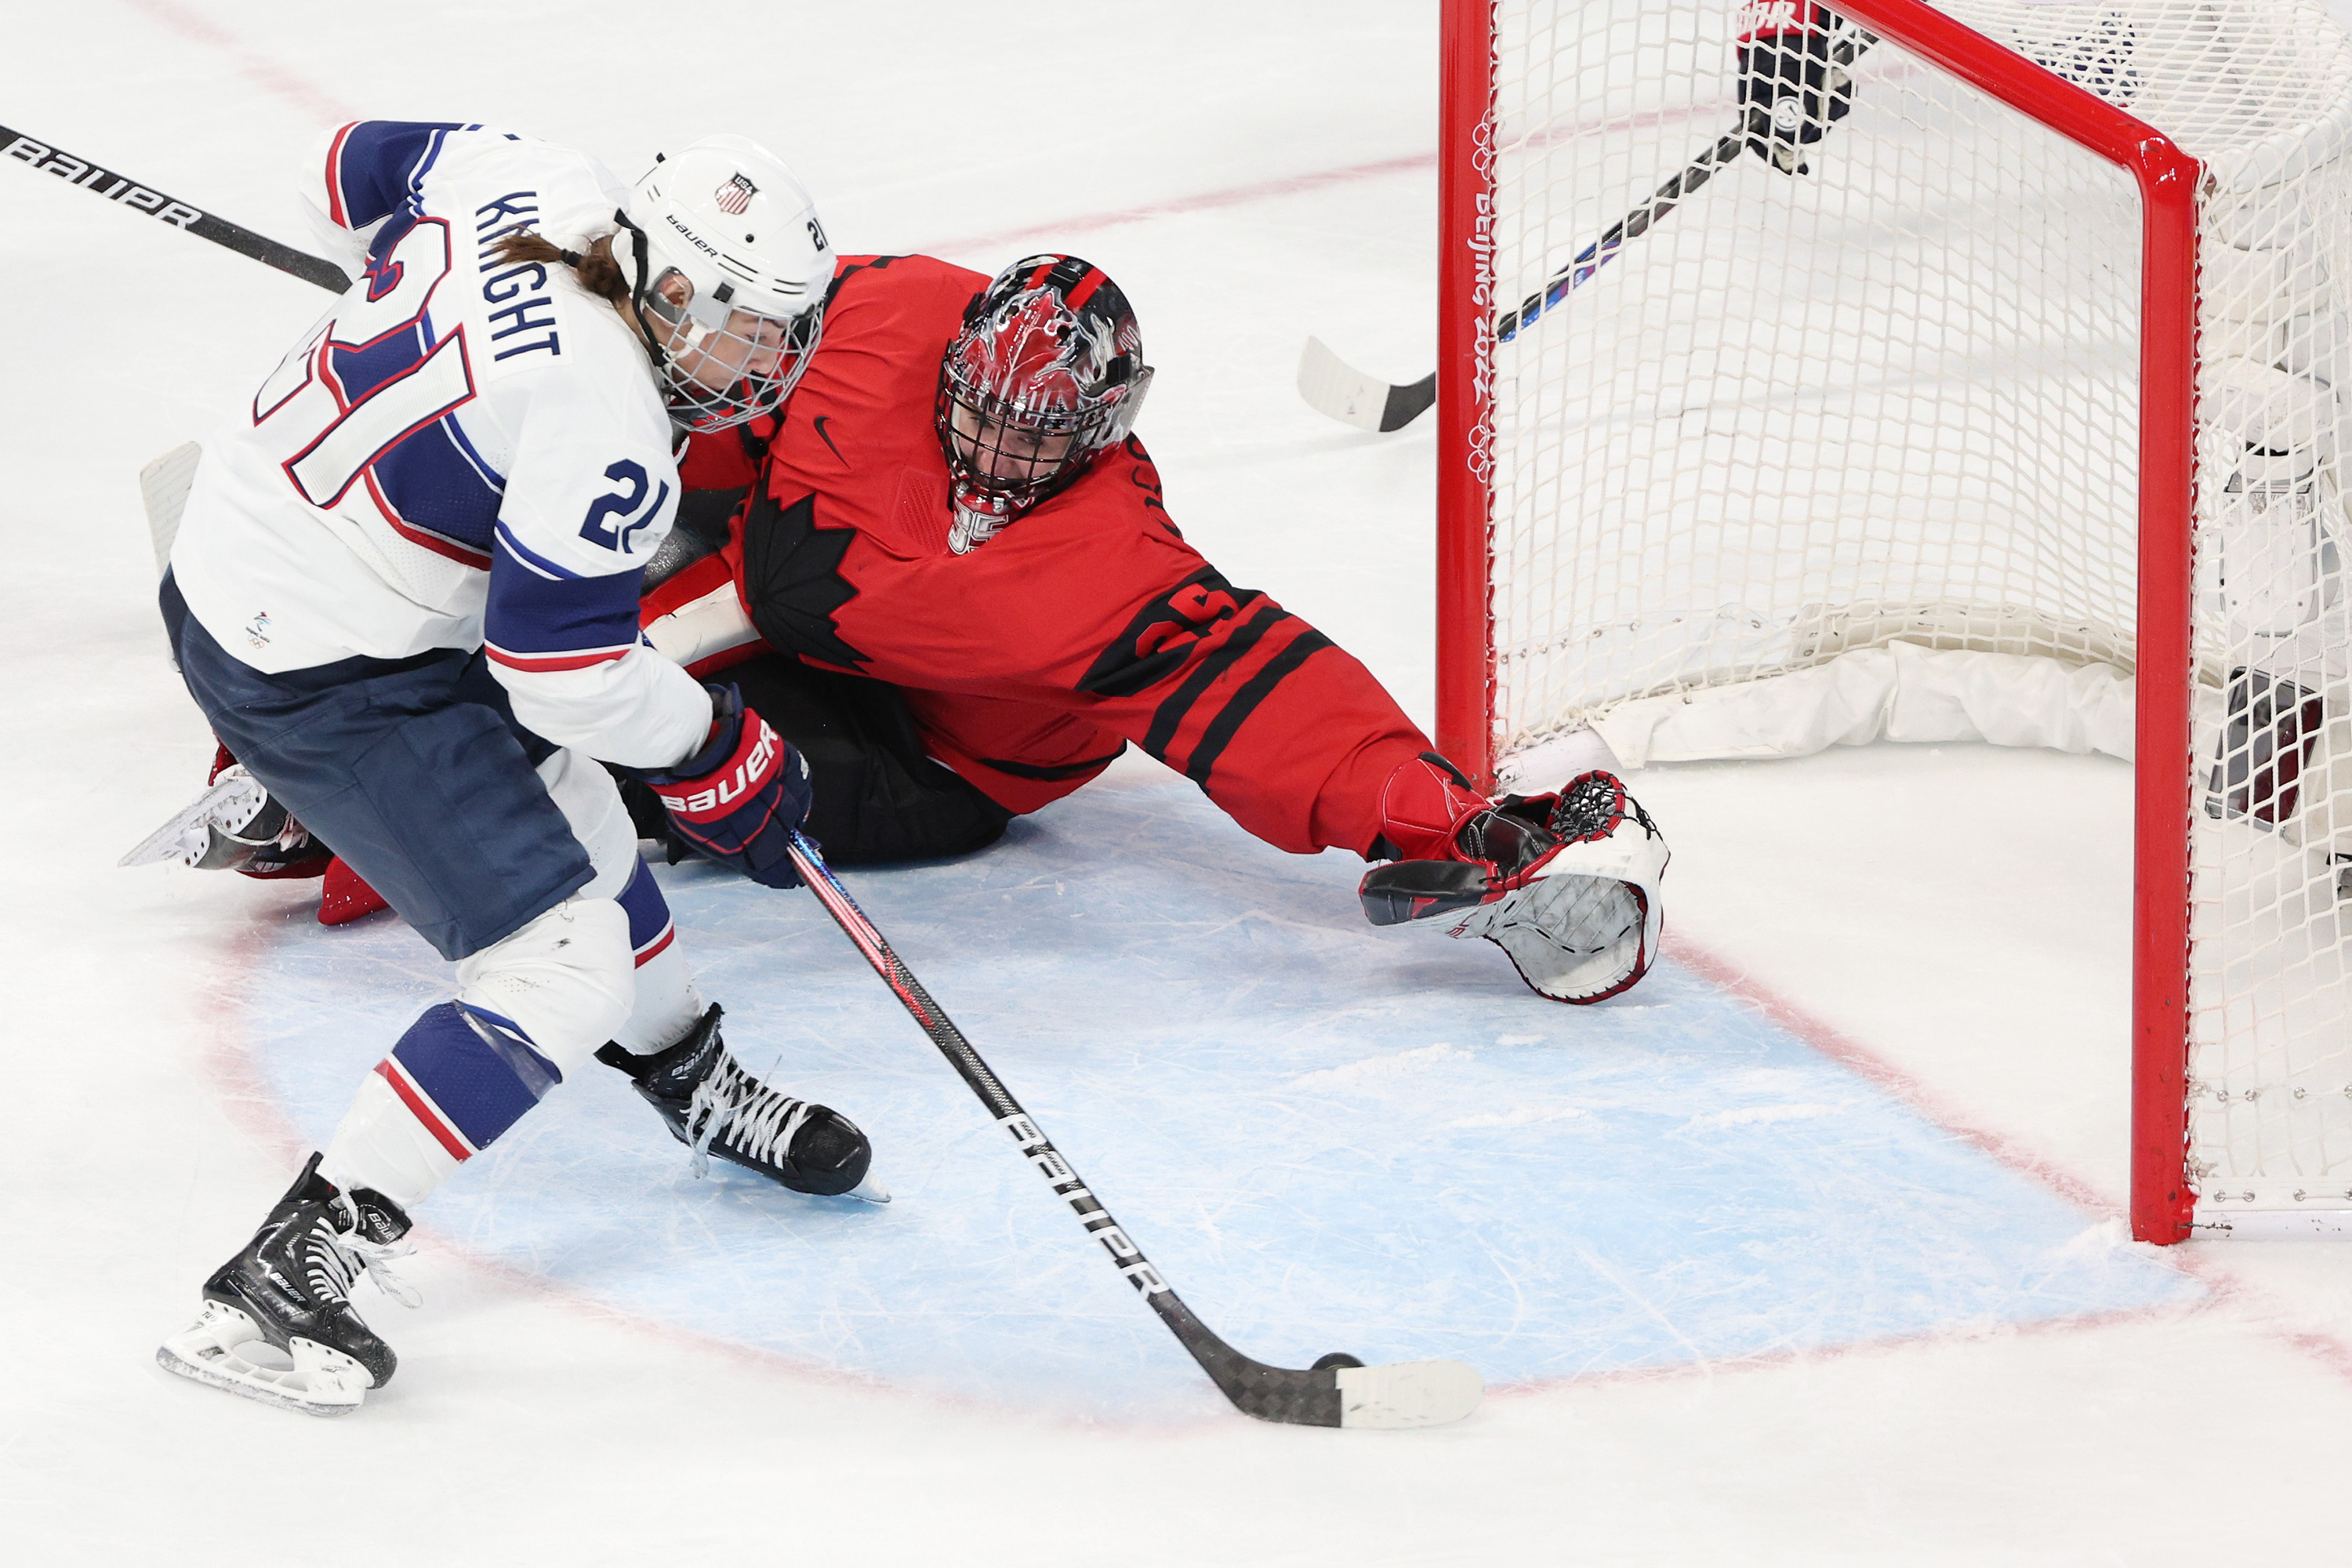 Team USA's Hilary Knight #21 scores against Team Canada's Ann-Renee Desbiens #35 in the second period during the women's ice hockey gold medal match on Thursday.